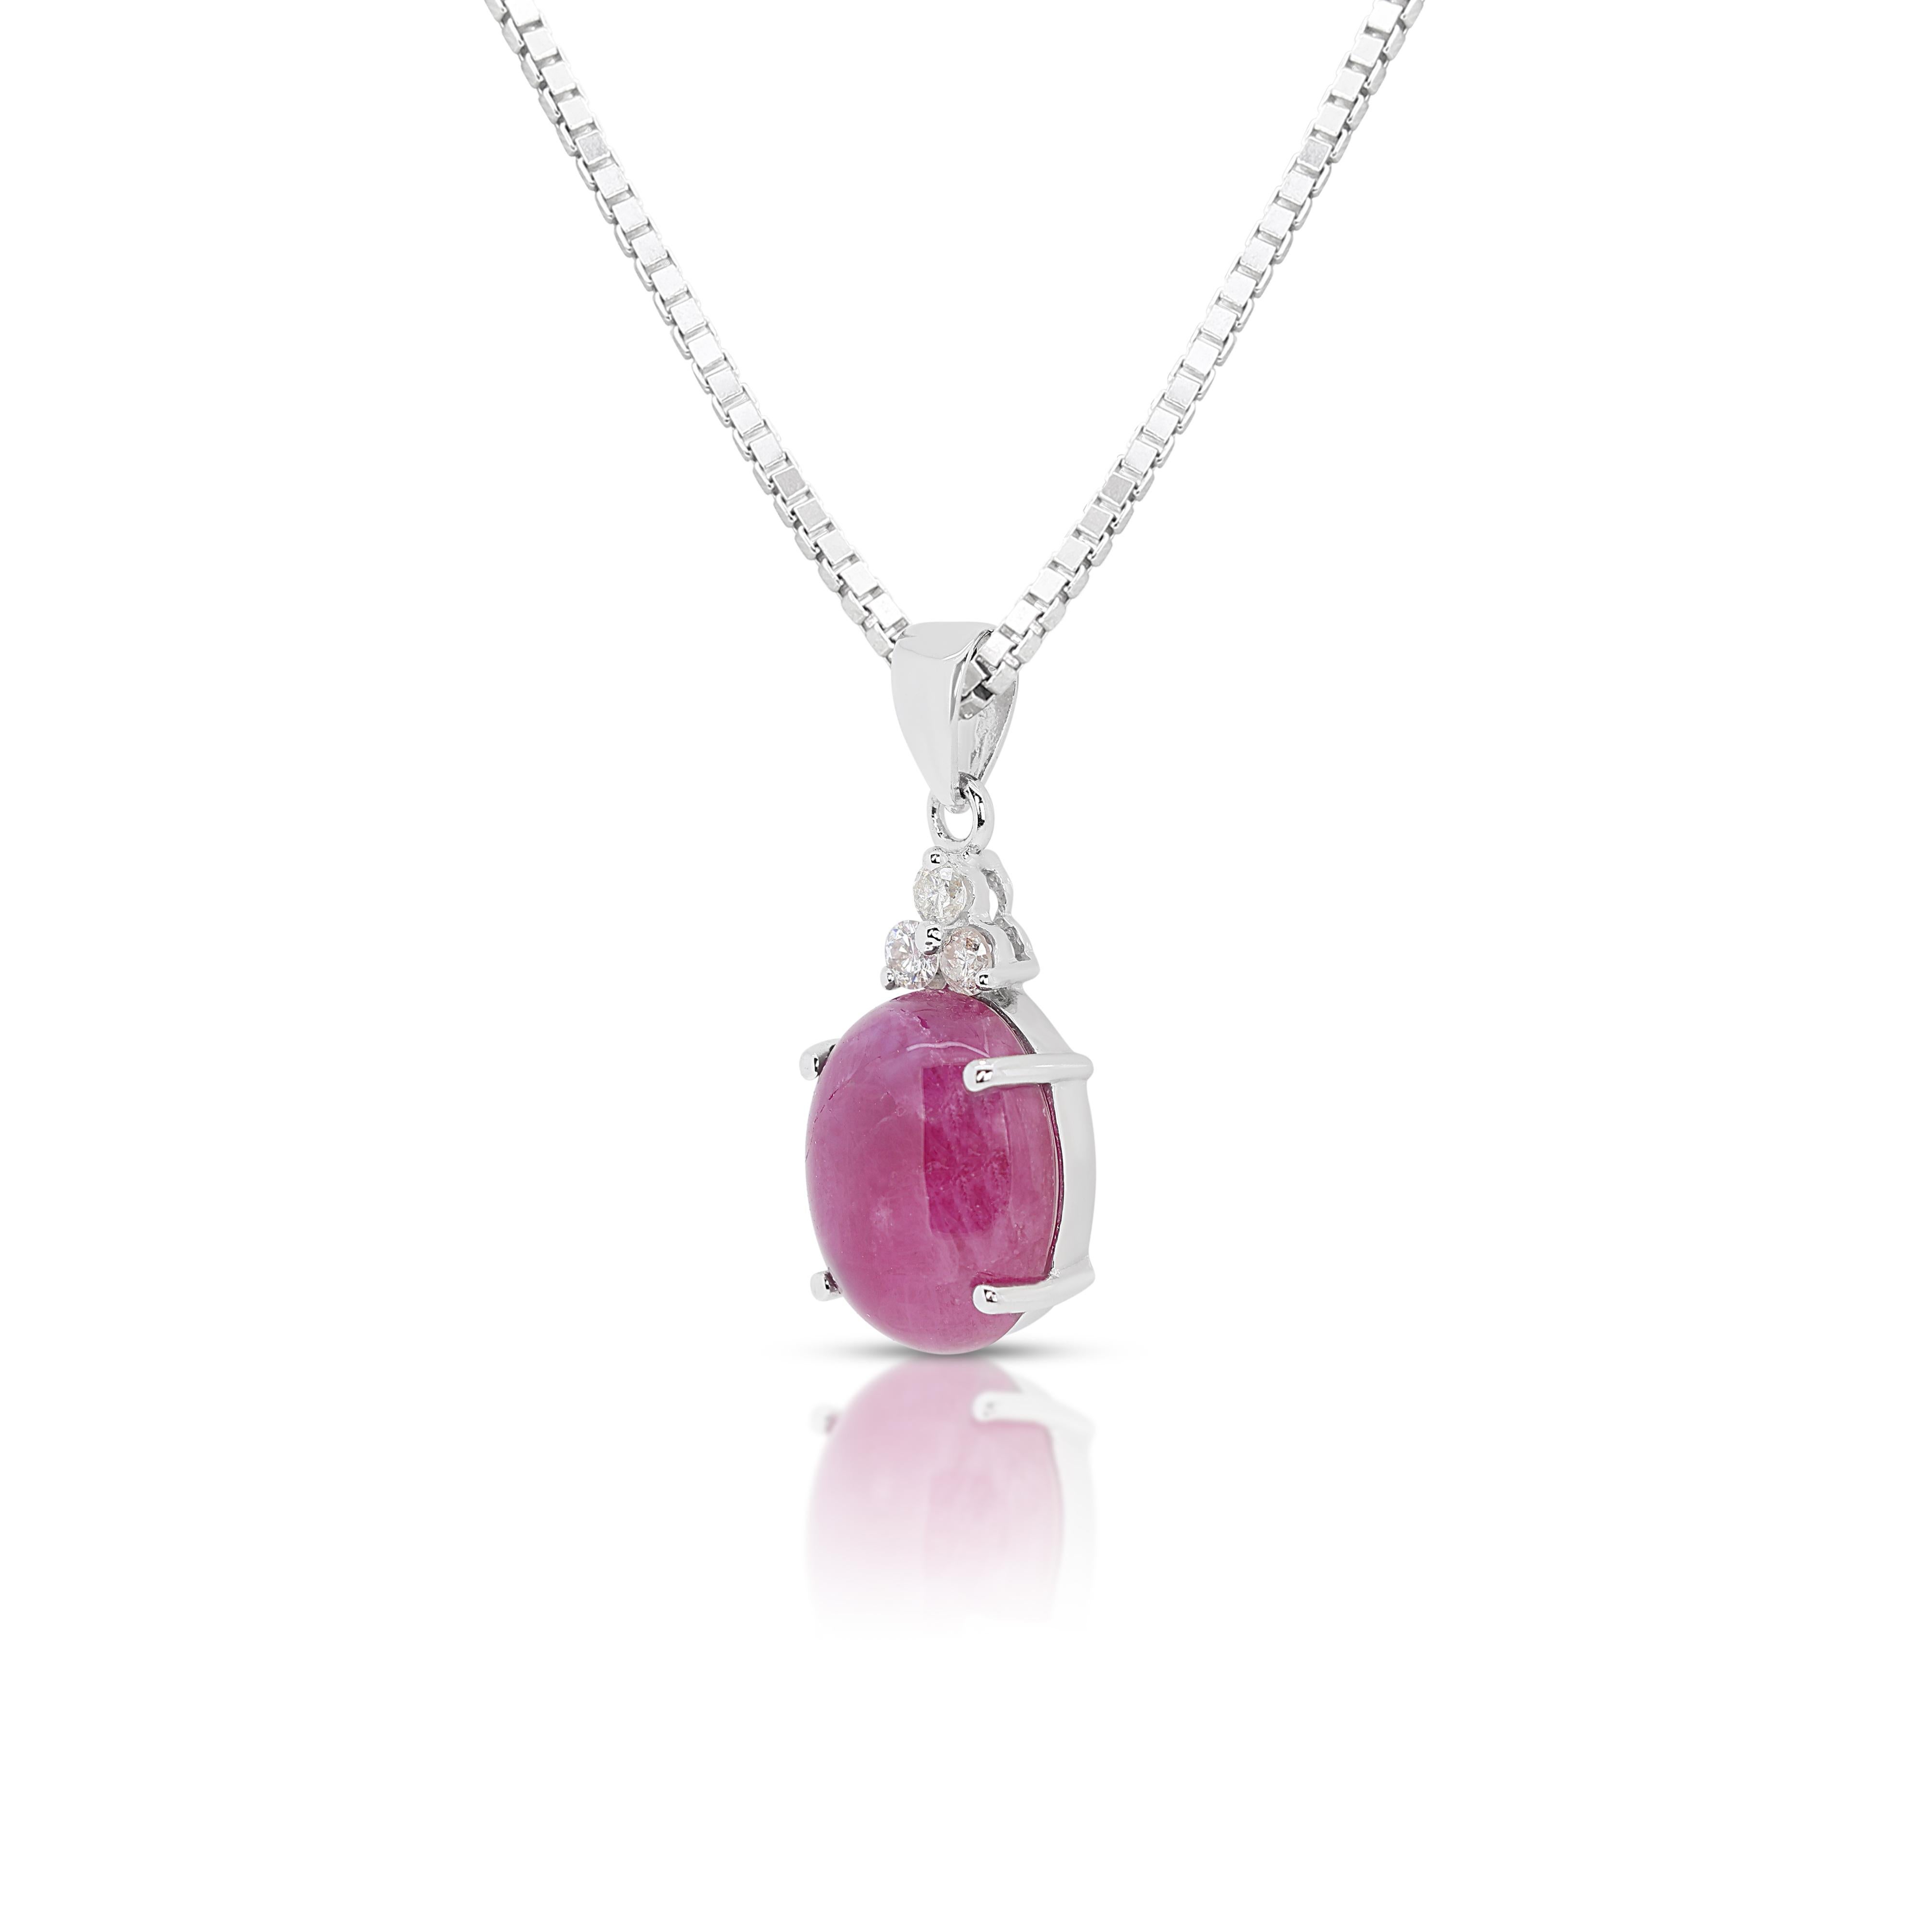 Women's Elegant 0.40ct Ruby Pendant with Diamonds in 18K White Gold - Chain Not Included